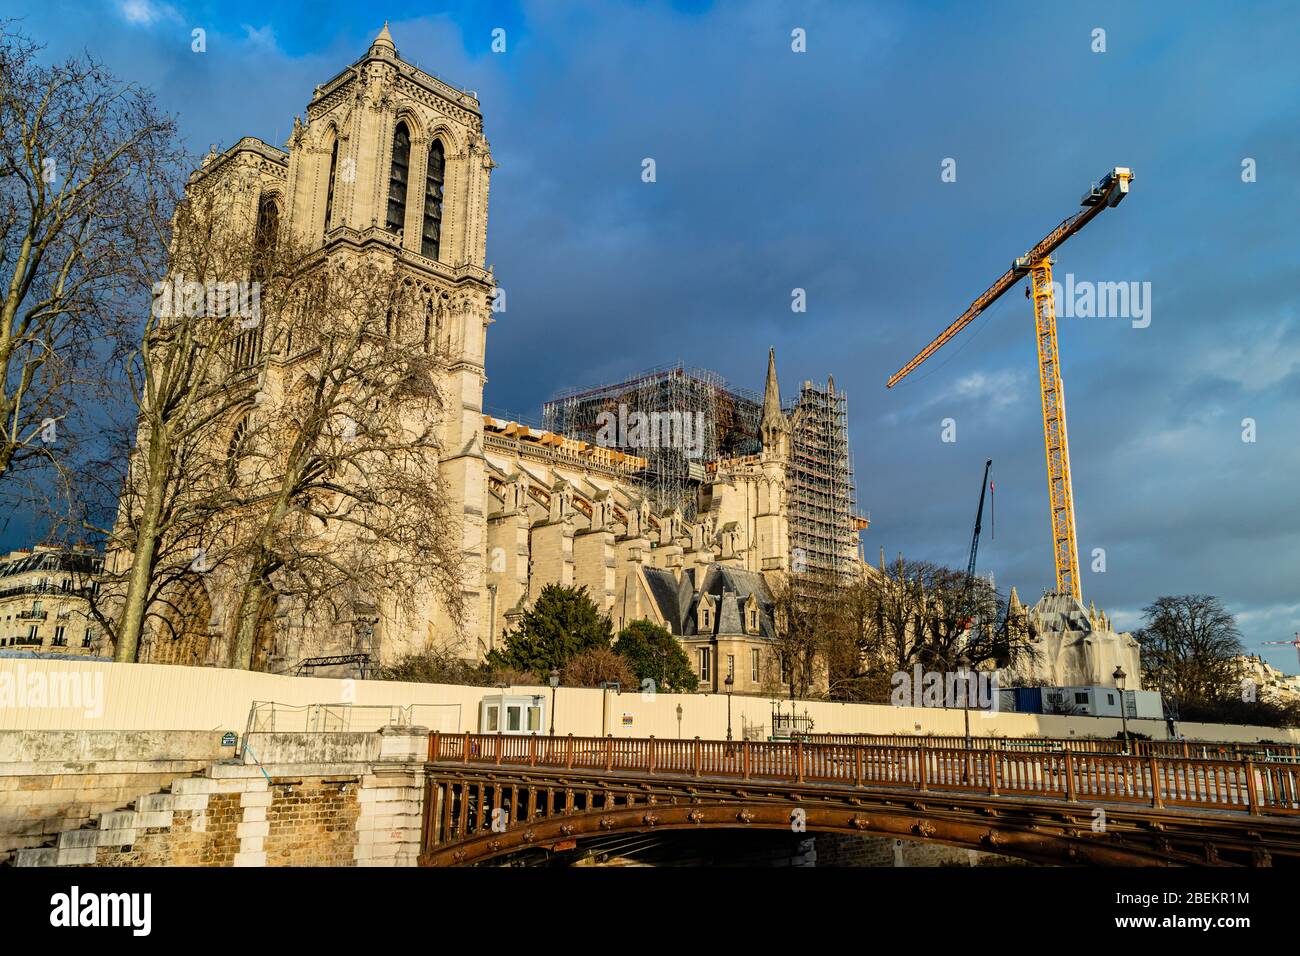 Reconstruction work on Notre Dame cathedral following the 2019 fire. Paris, France. February 2020. Stock Photo